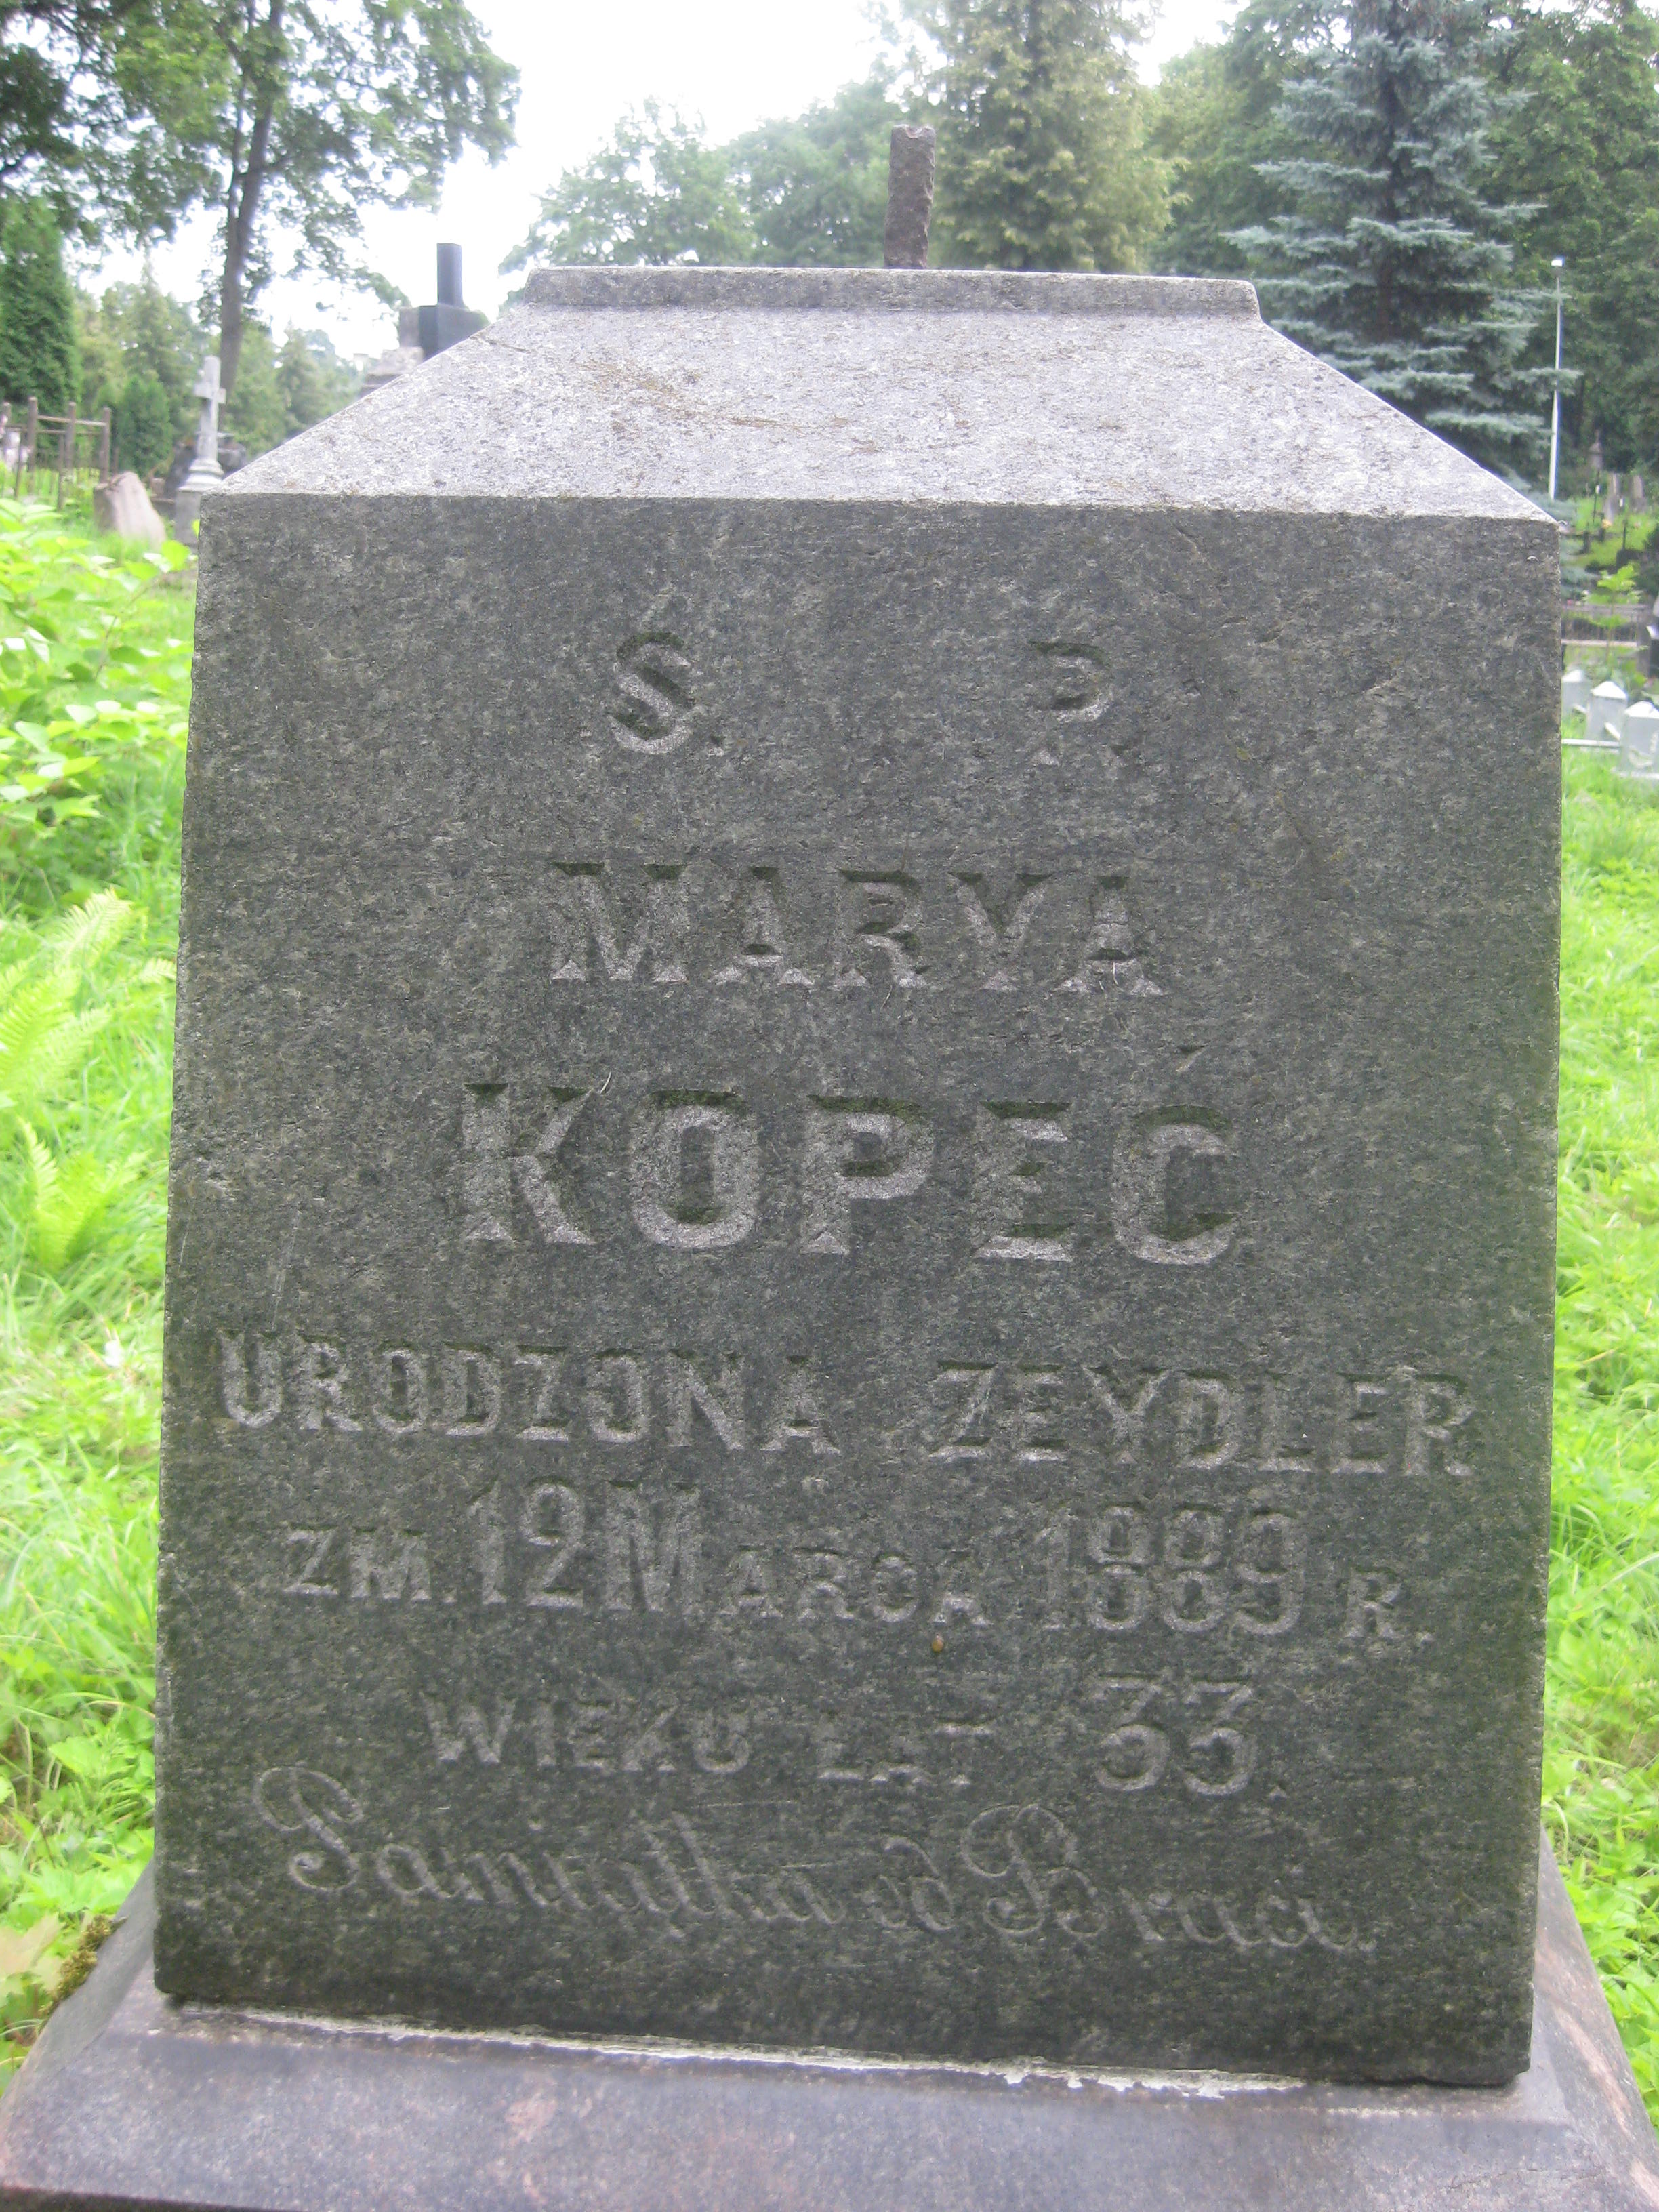 Fragment of a tombstone of the Zeidler family, Ross cemetery, as of 2013